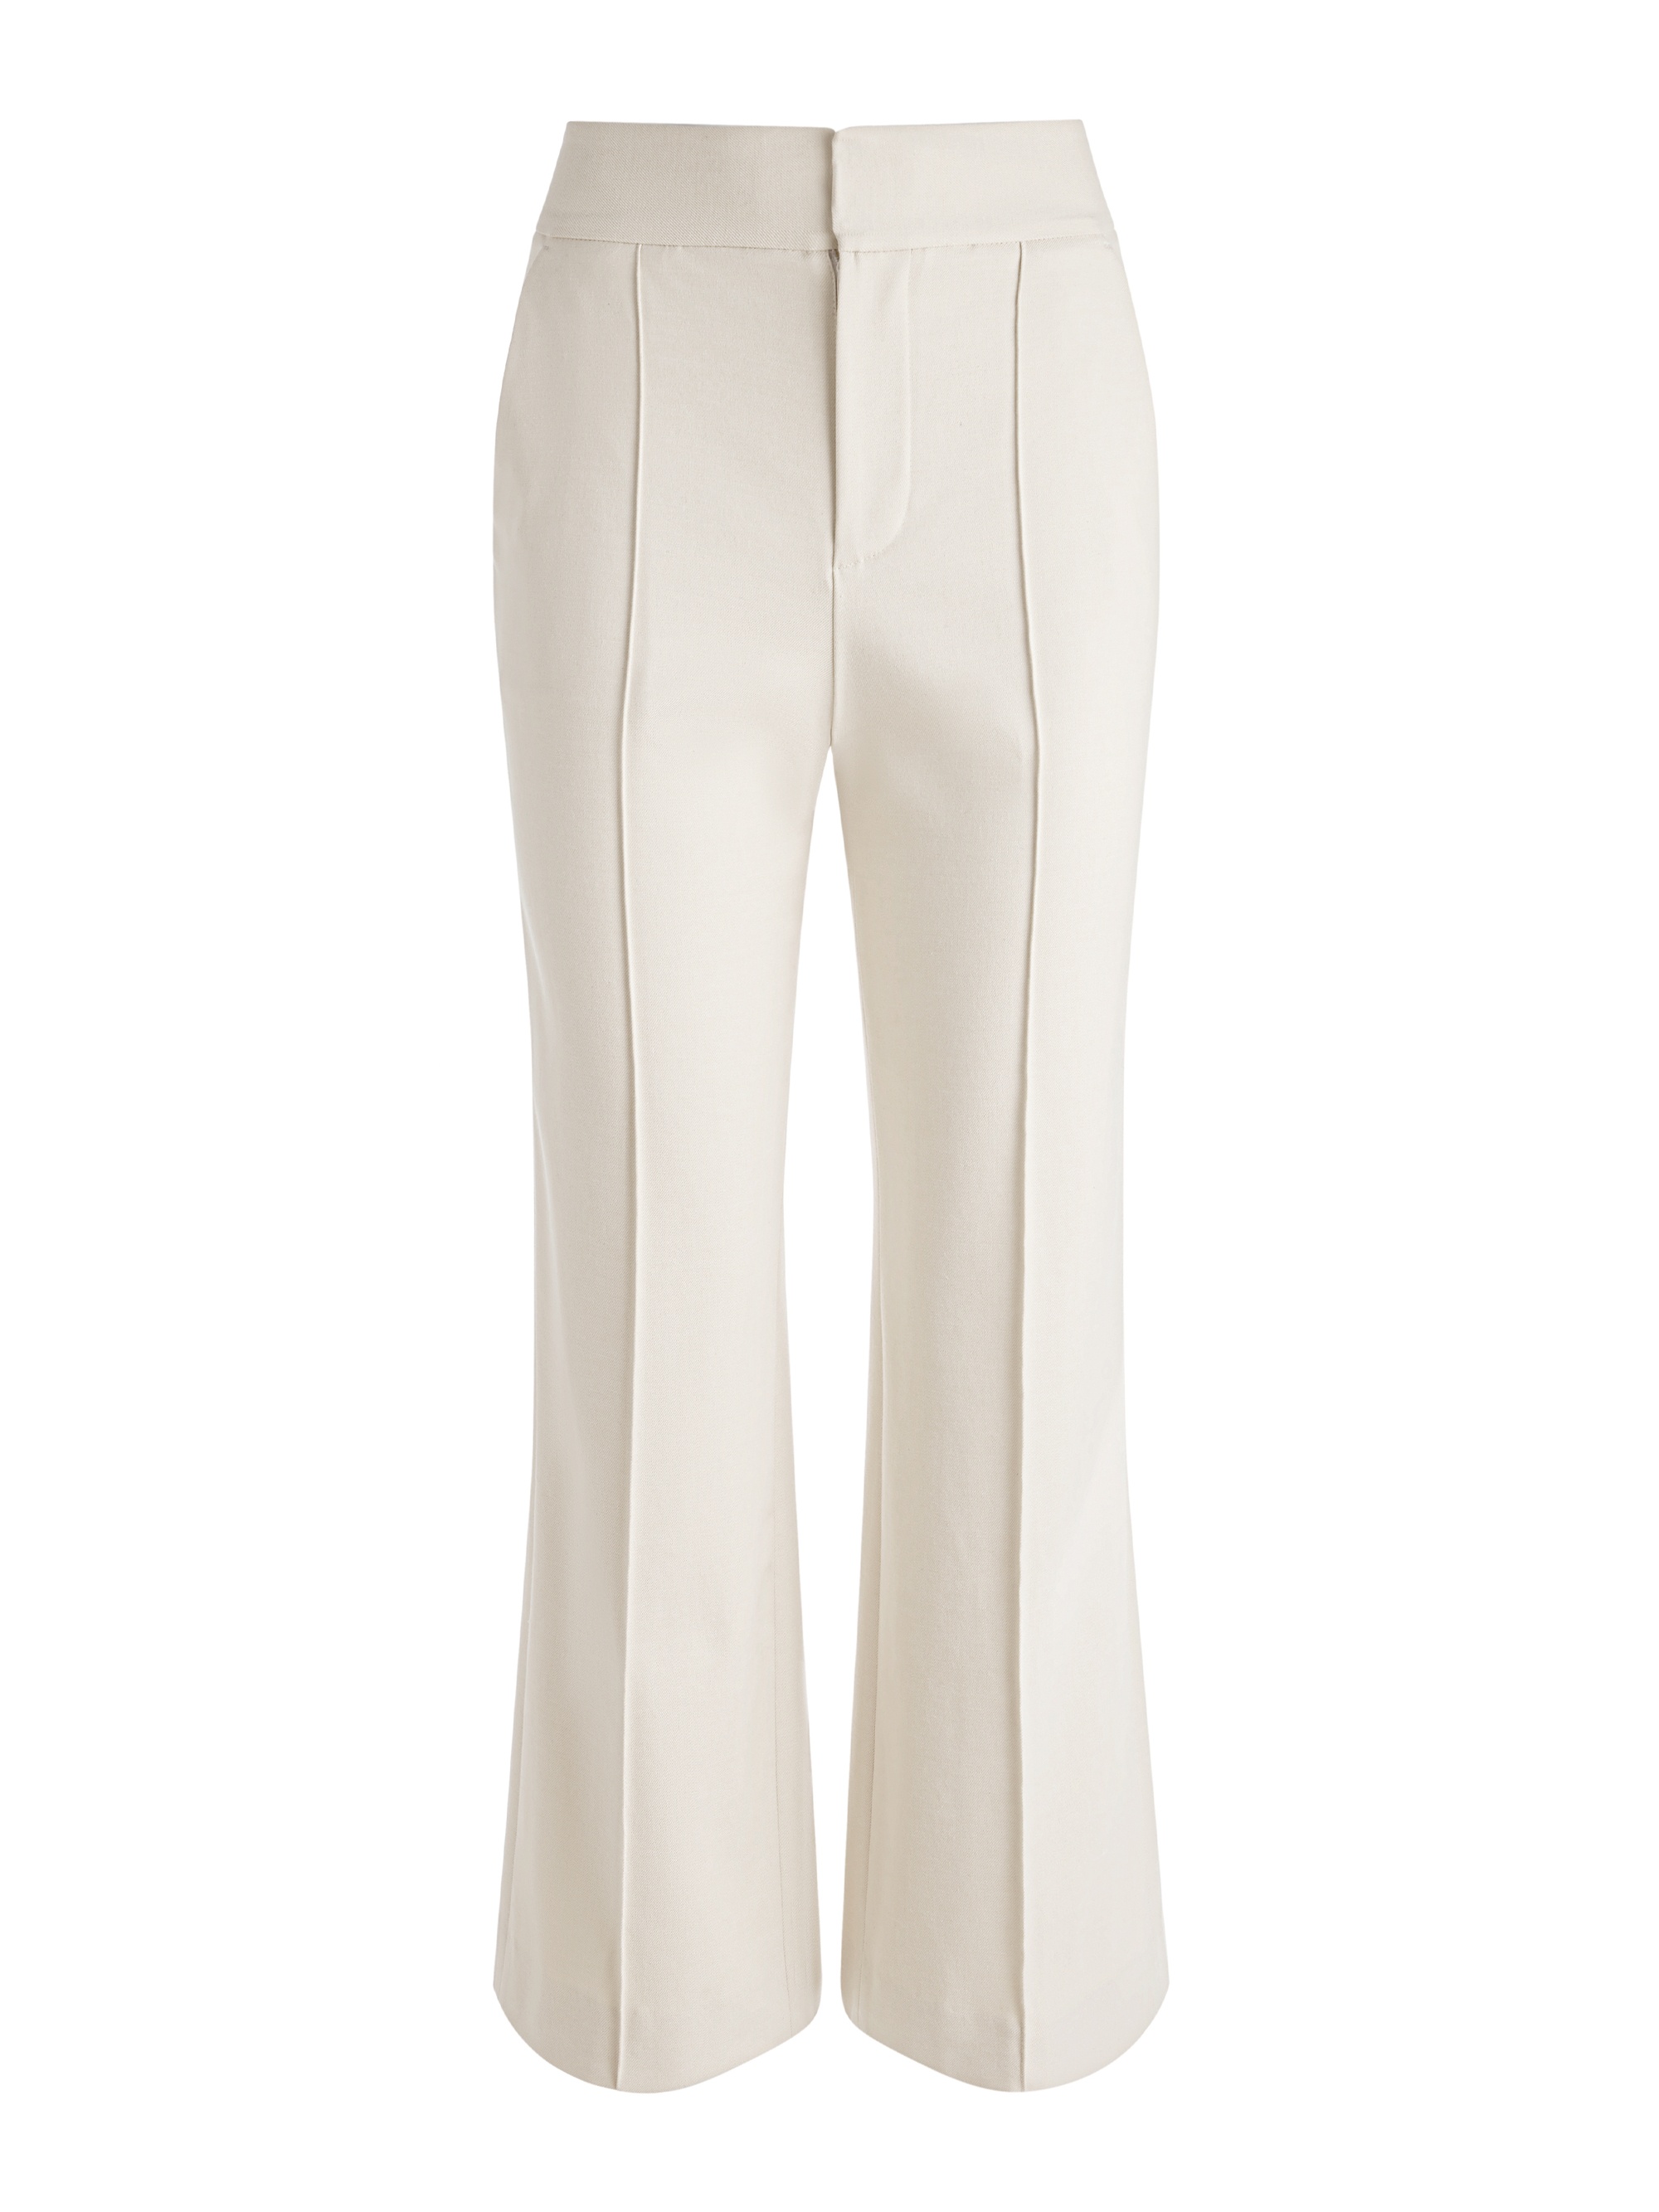 DYLAN HIGH RISE CROPPED PANT - 1